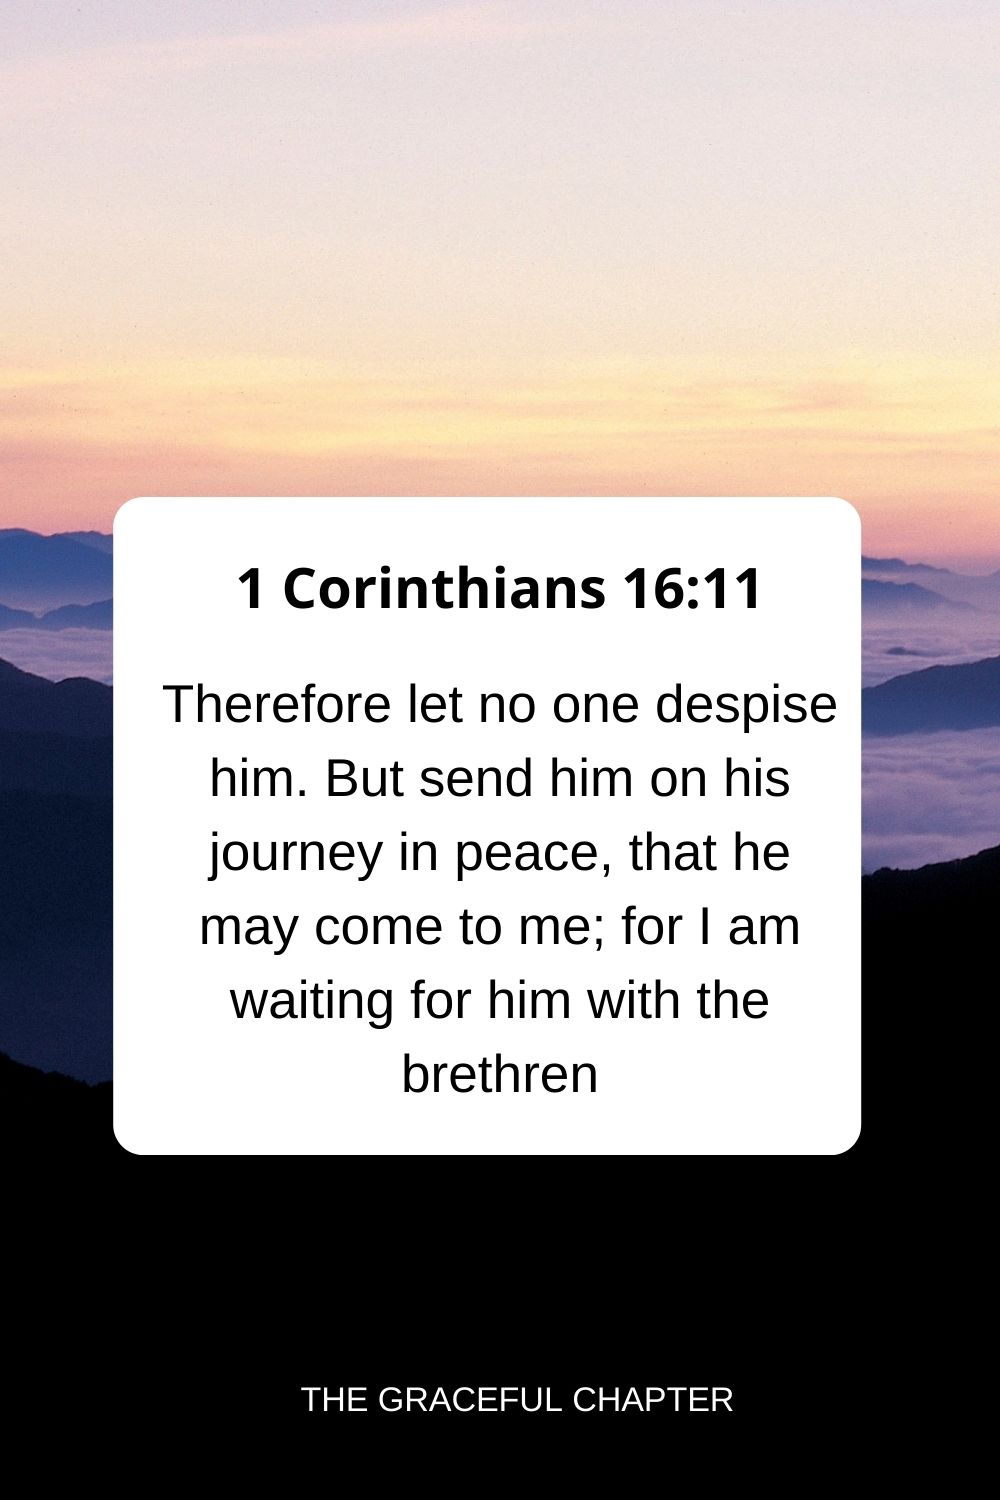 Therefore let no one despise him. But send him on his journey in peace, that he may come to me; for I am waiting for him with the brethren. 1 Corinthians 16:11